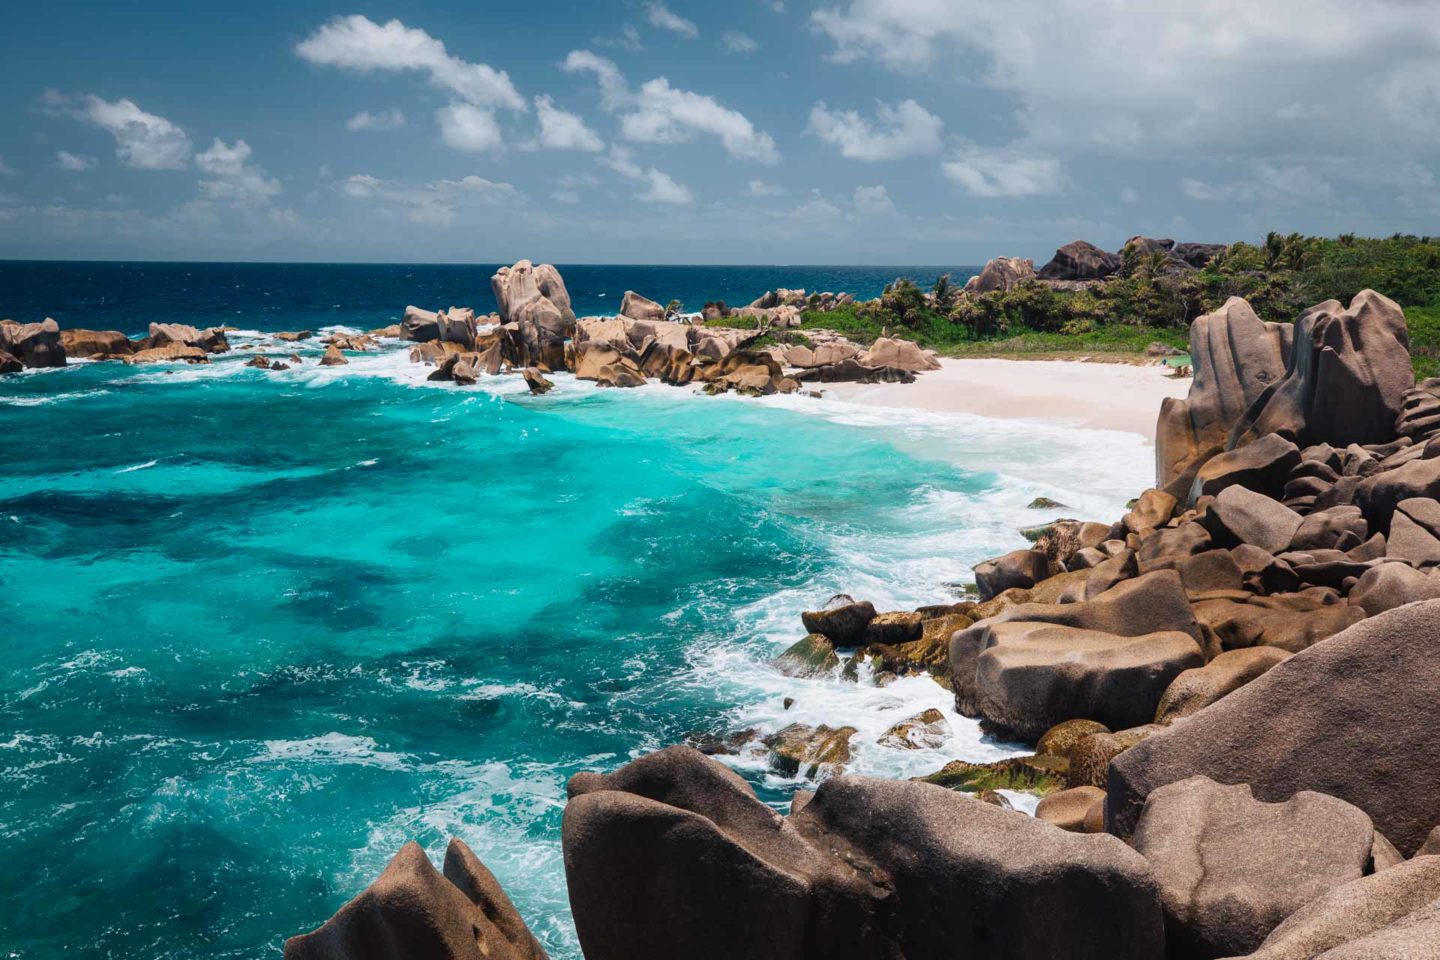 beaches on la digue, la digue beaches, la digue island, la digue seychelles, things to do in la digue, best beaches in la digue